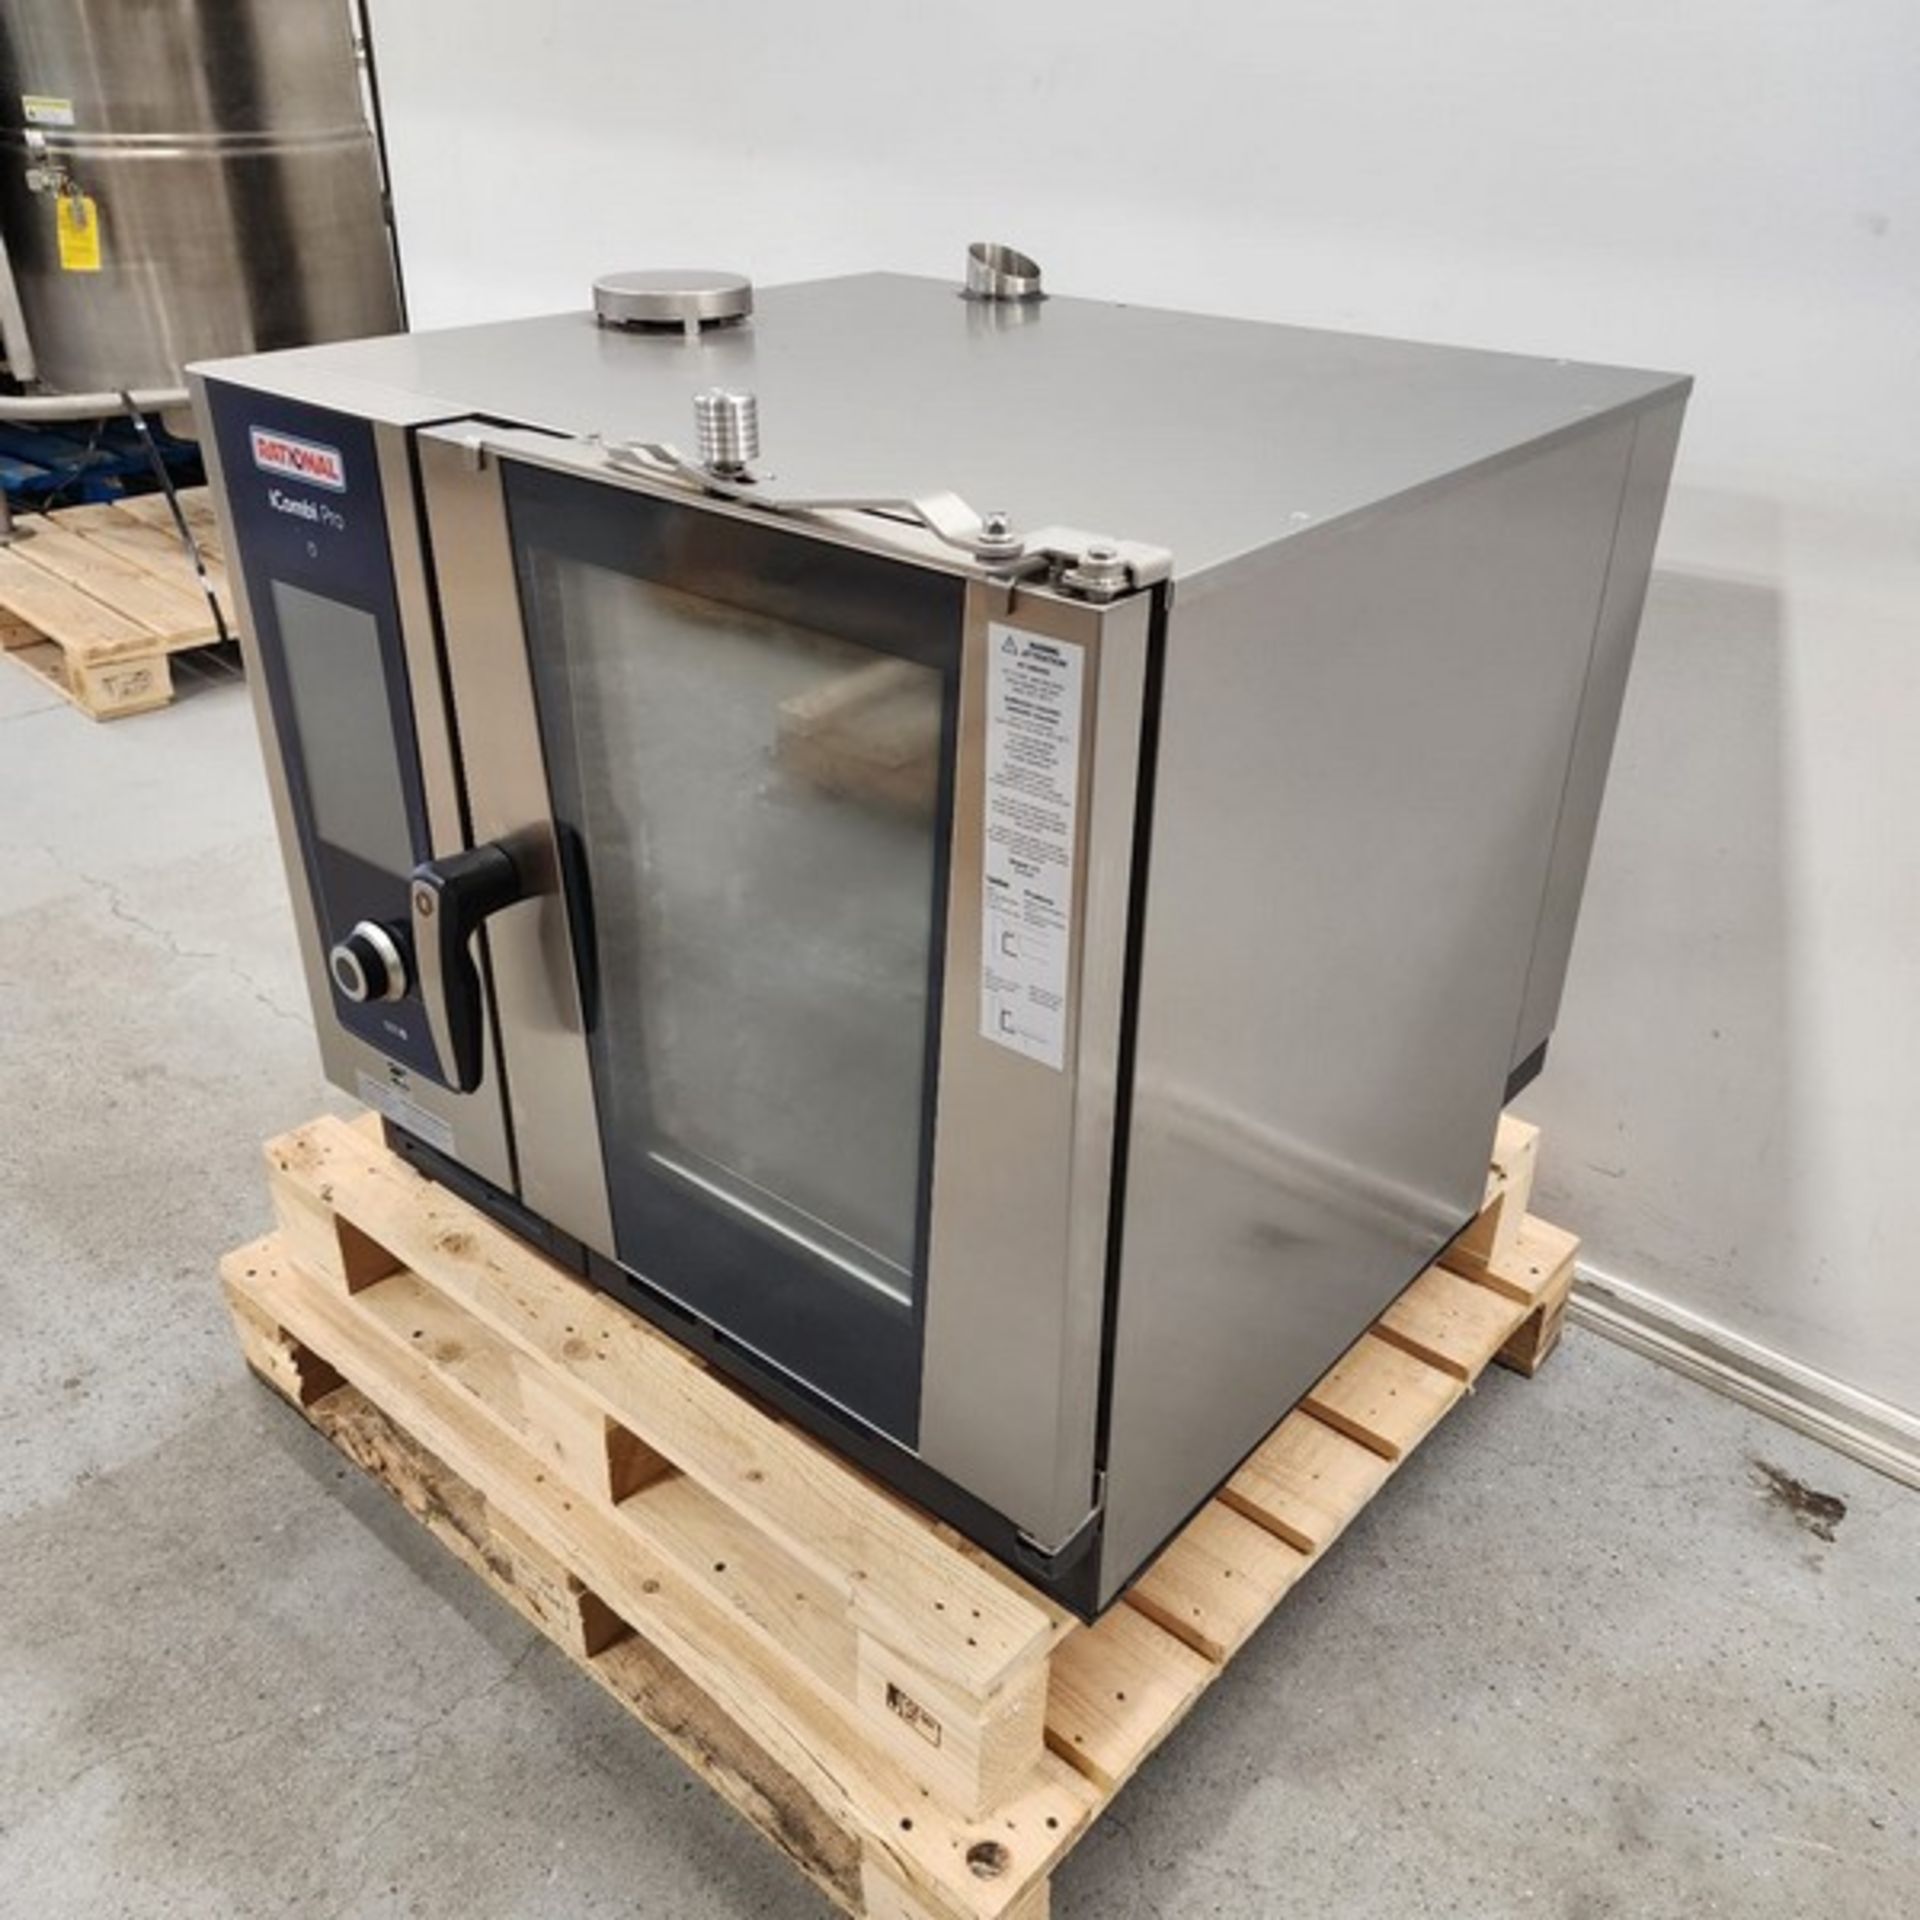 Rational Oven 480 v 3 phase brand new icombi pro new condition (Item #103R) (simple loading Fee $ - Image 7 of 7